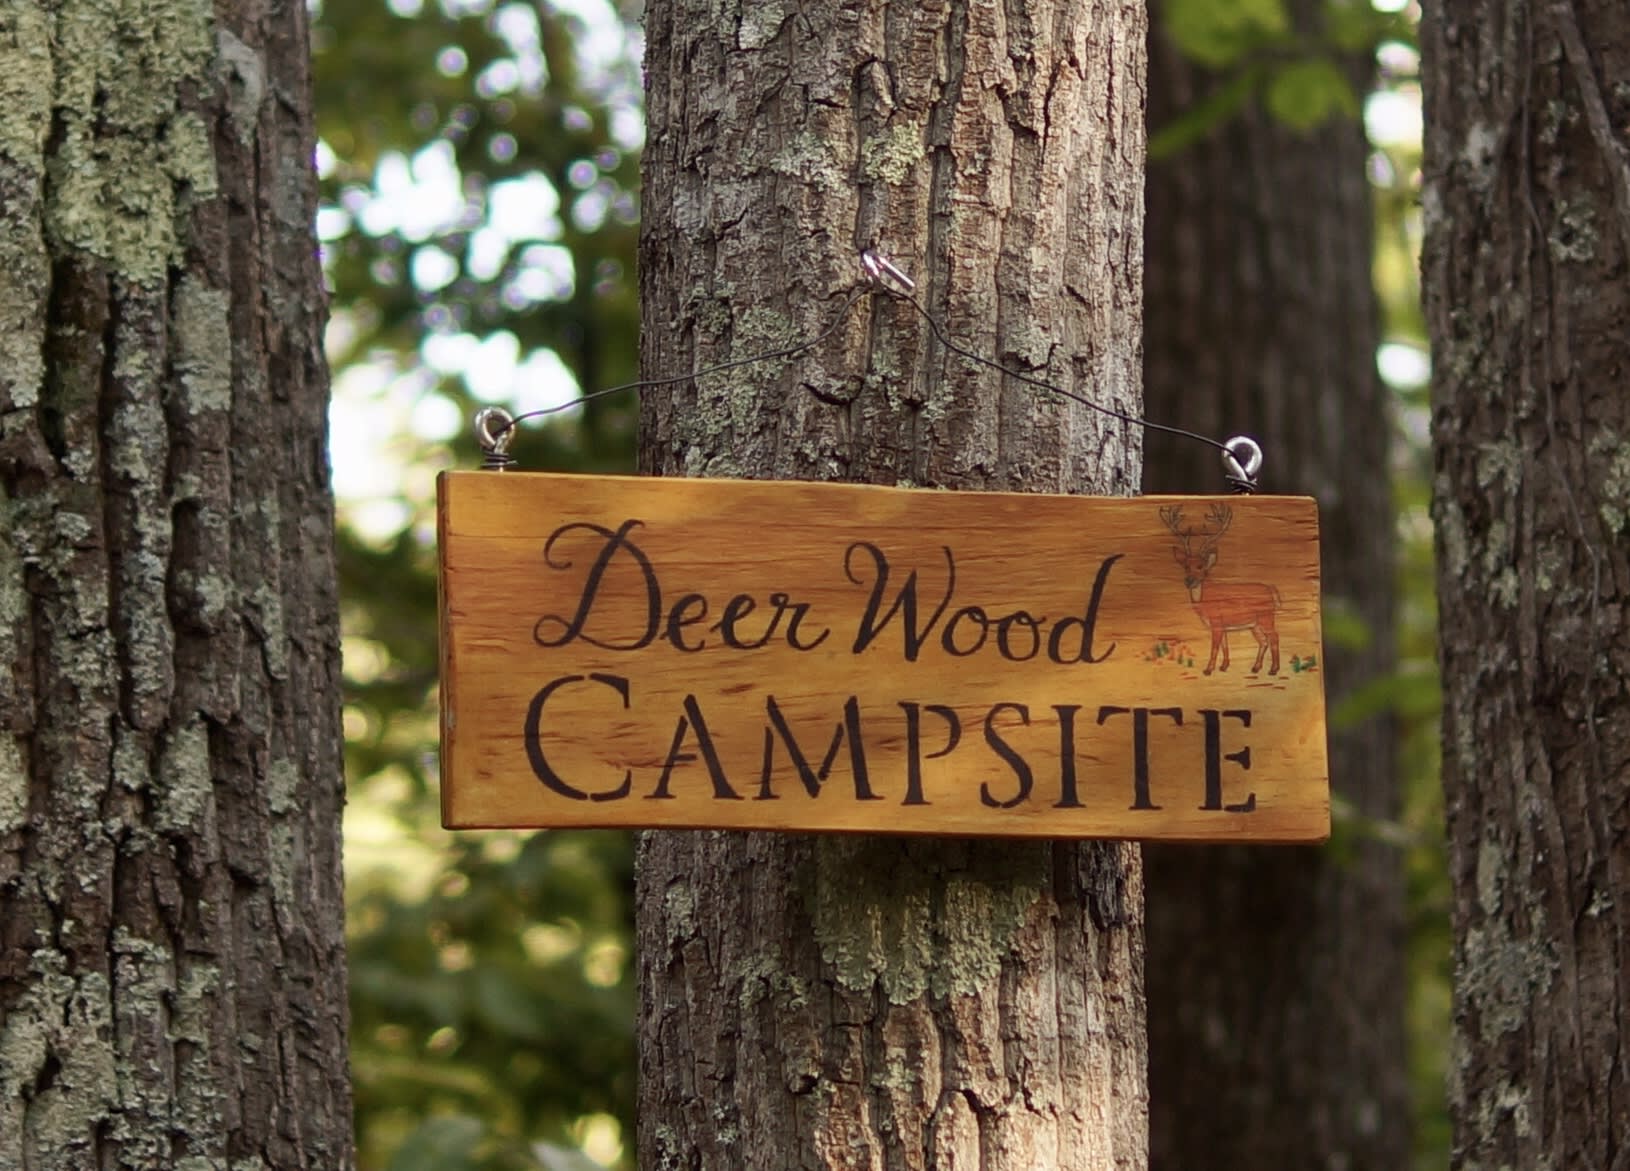 Deer Wood is perfectly named since deer have been spotted right in this location. Pitch a tent here and you will be surrounded  by nature.